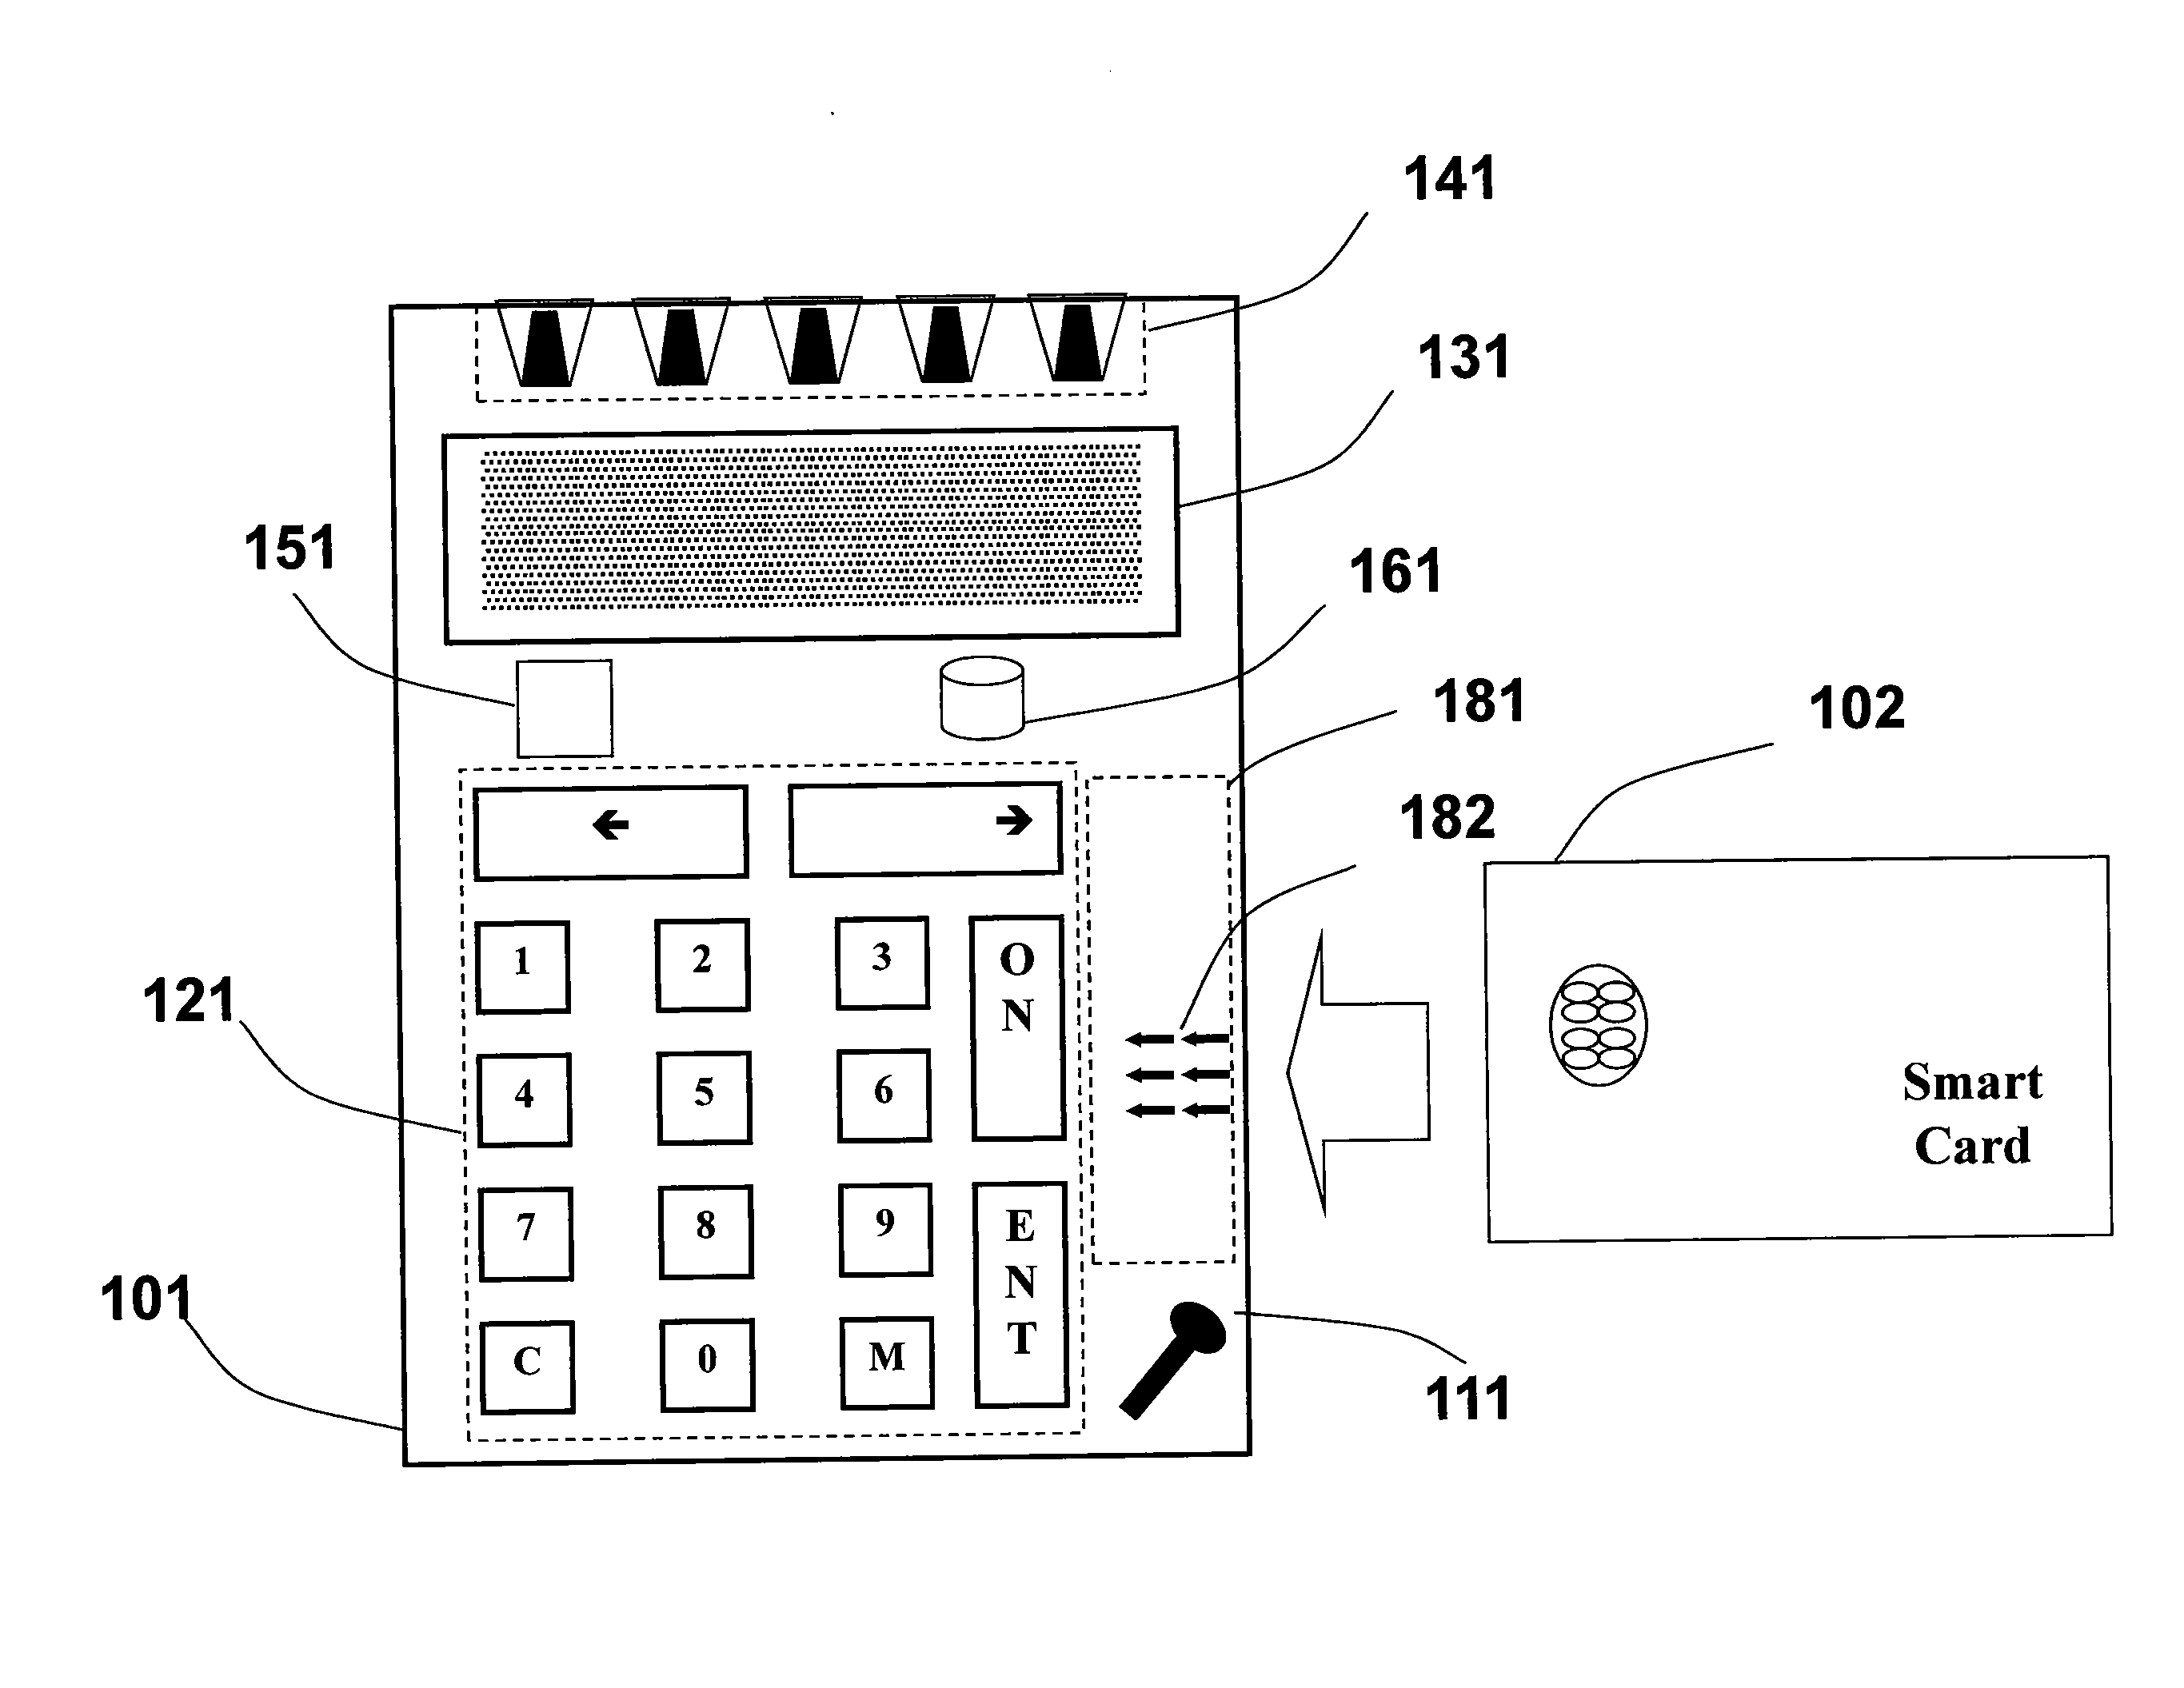 Strong authentication token with acoustic data input